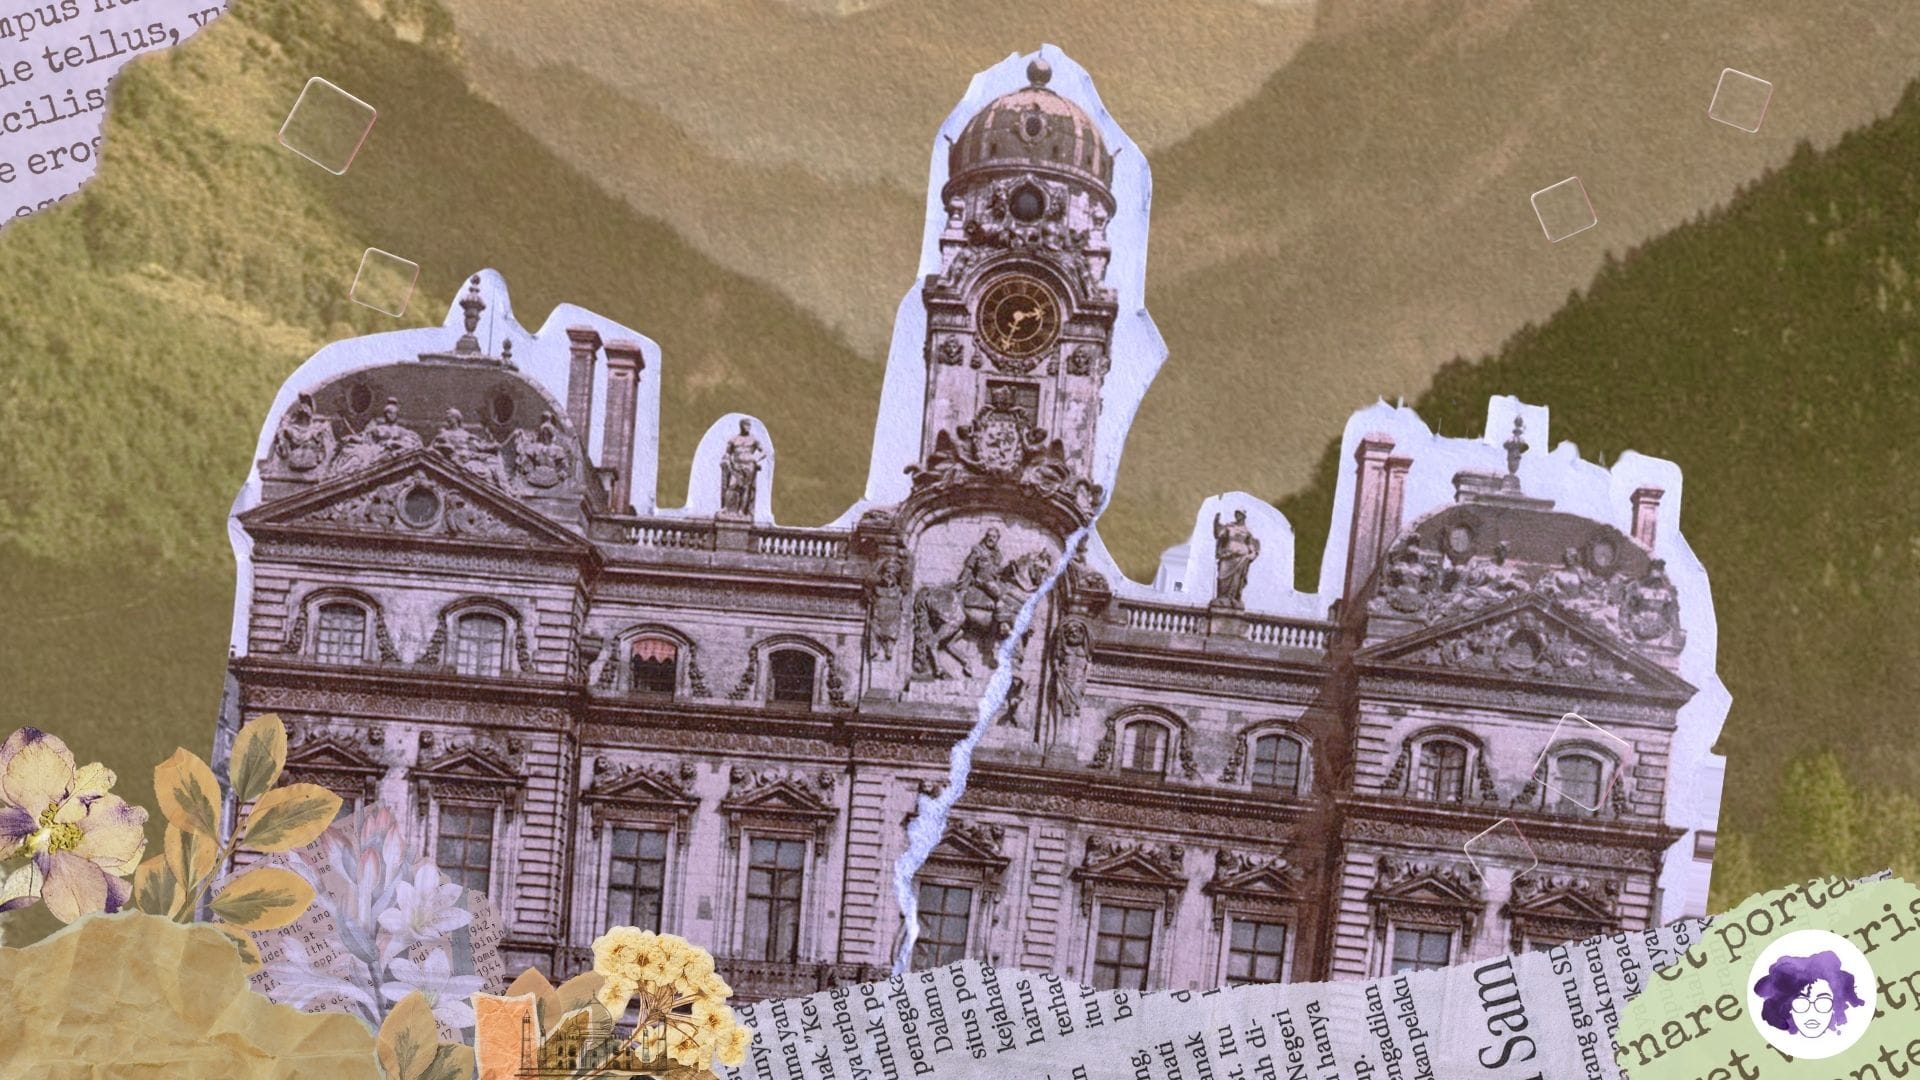 An old British institutional building is shown as a paper cut out.